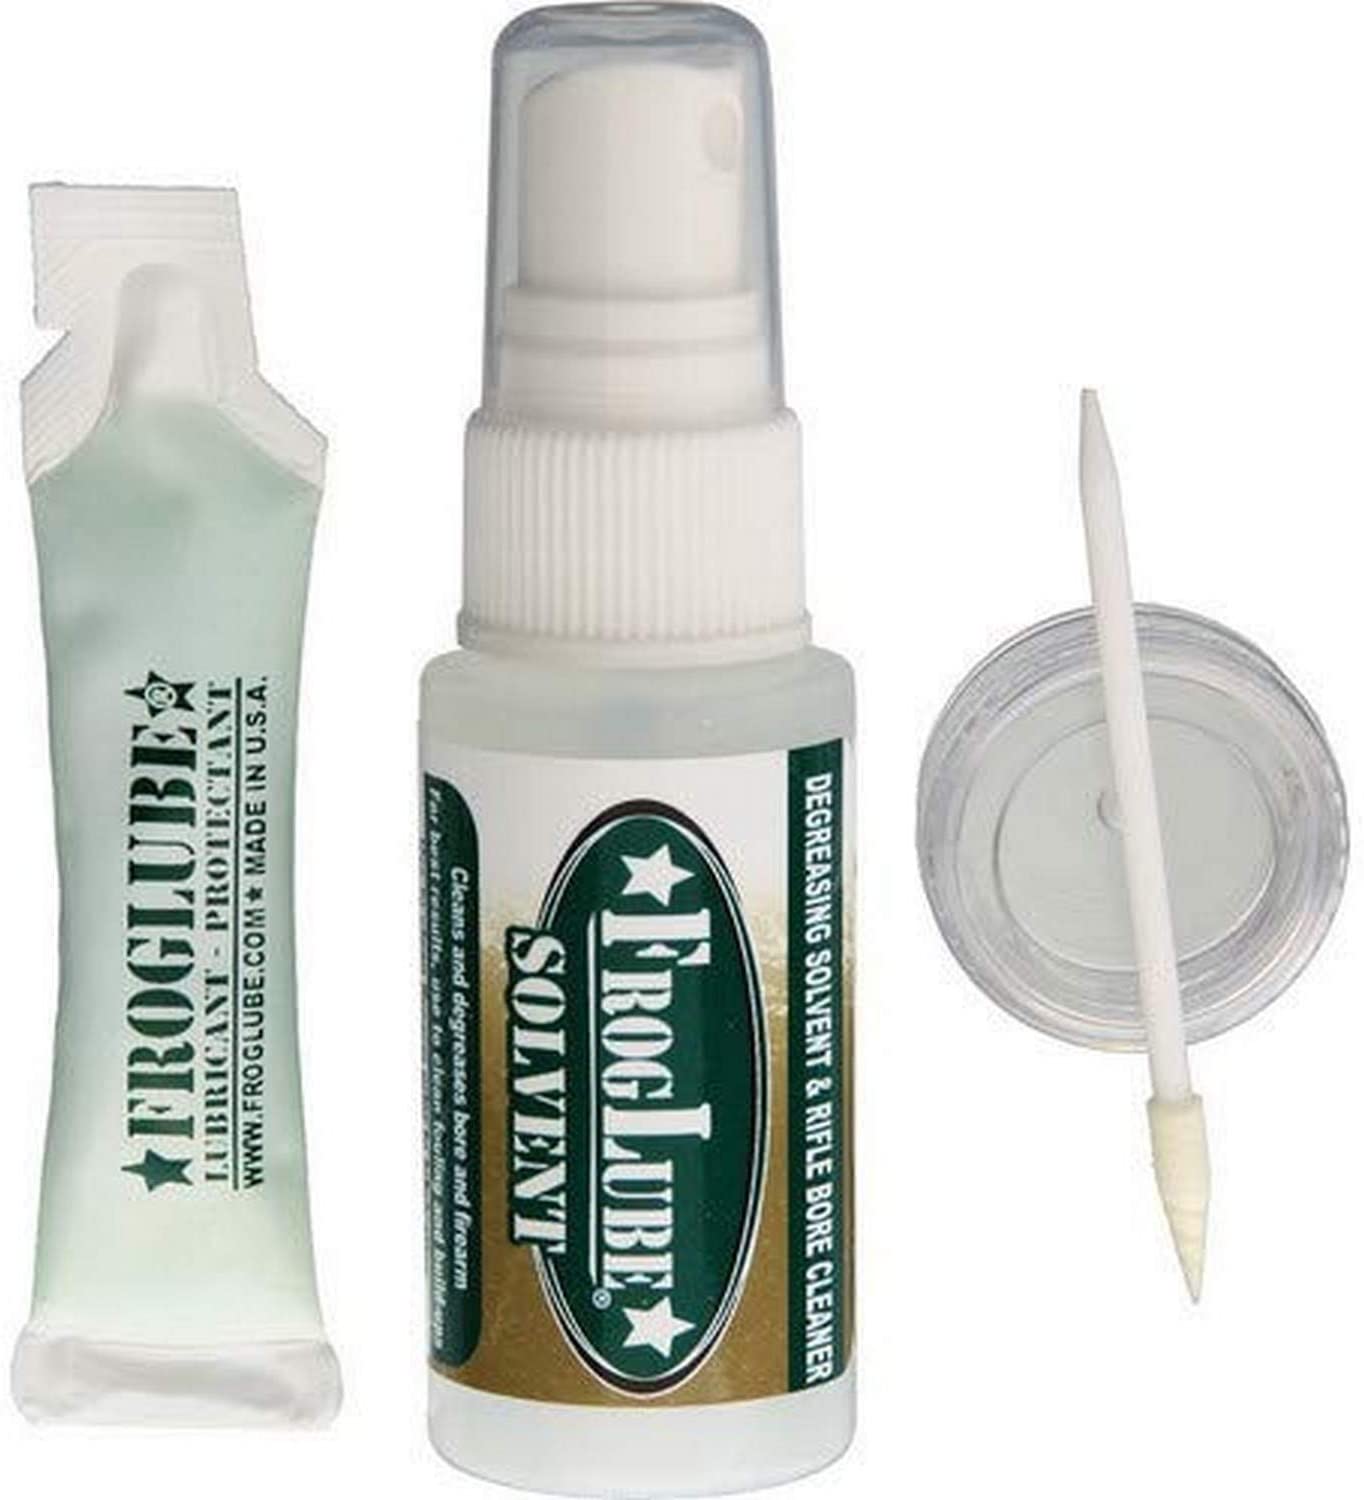 FrogLube Knife Cleaning/Protection Kit